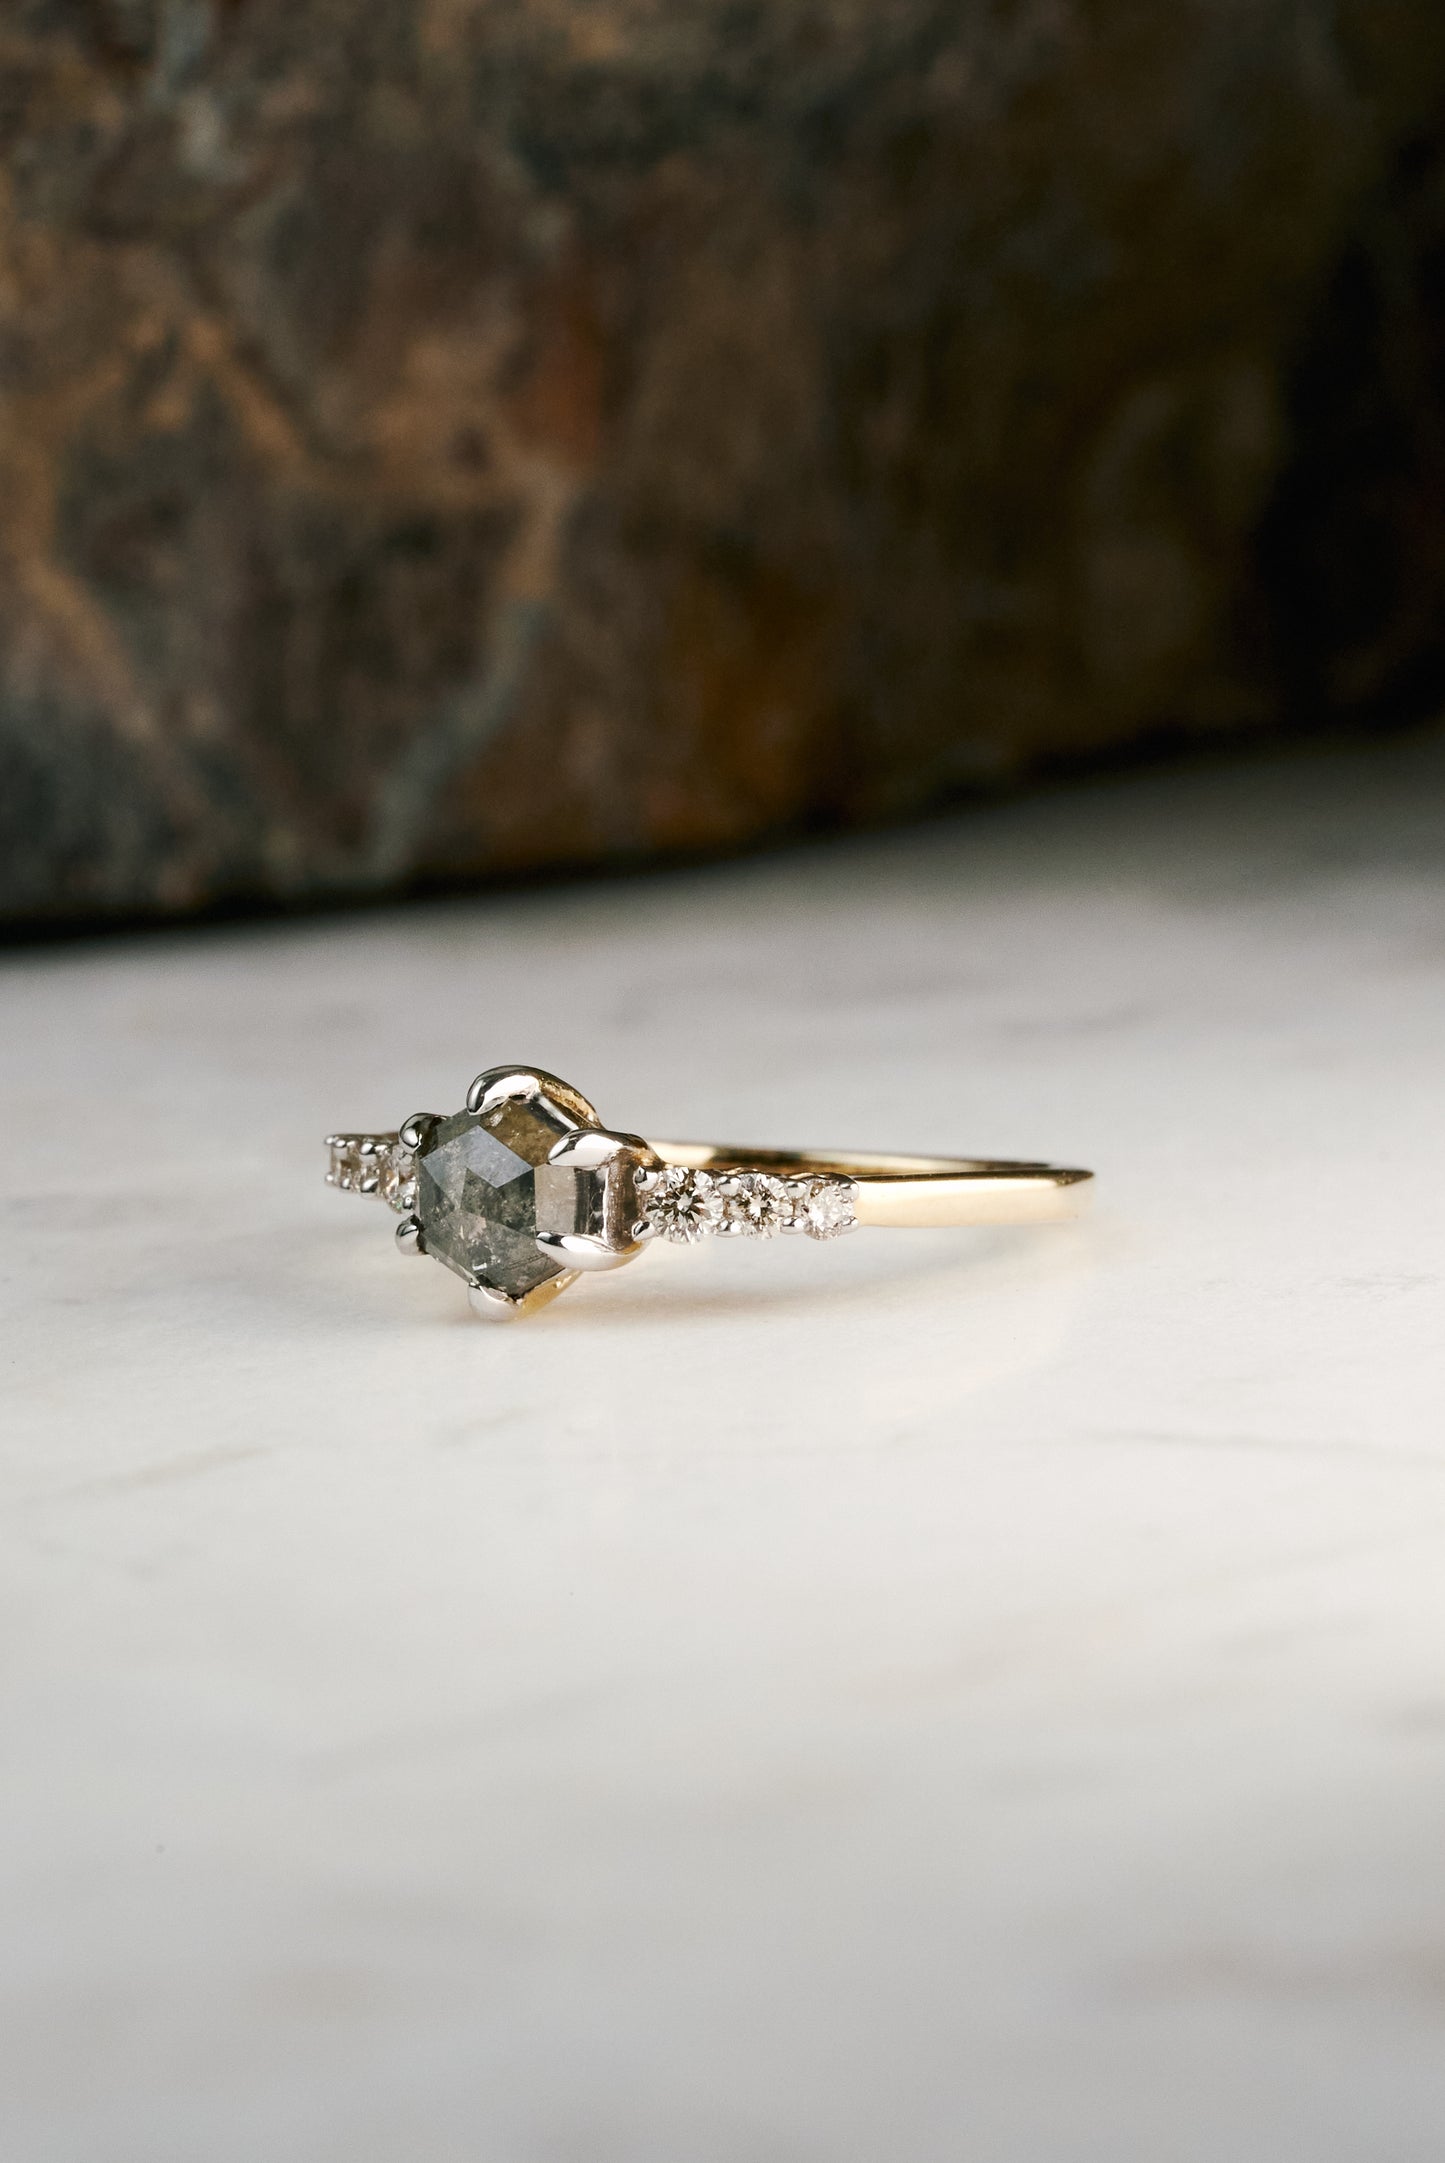 Salt & Pepper Engagement Ring with 0.7ct Hex-Cut Diamond